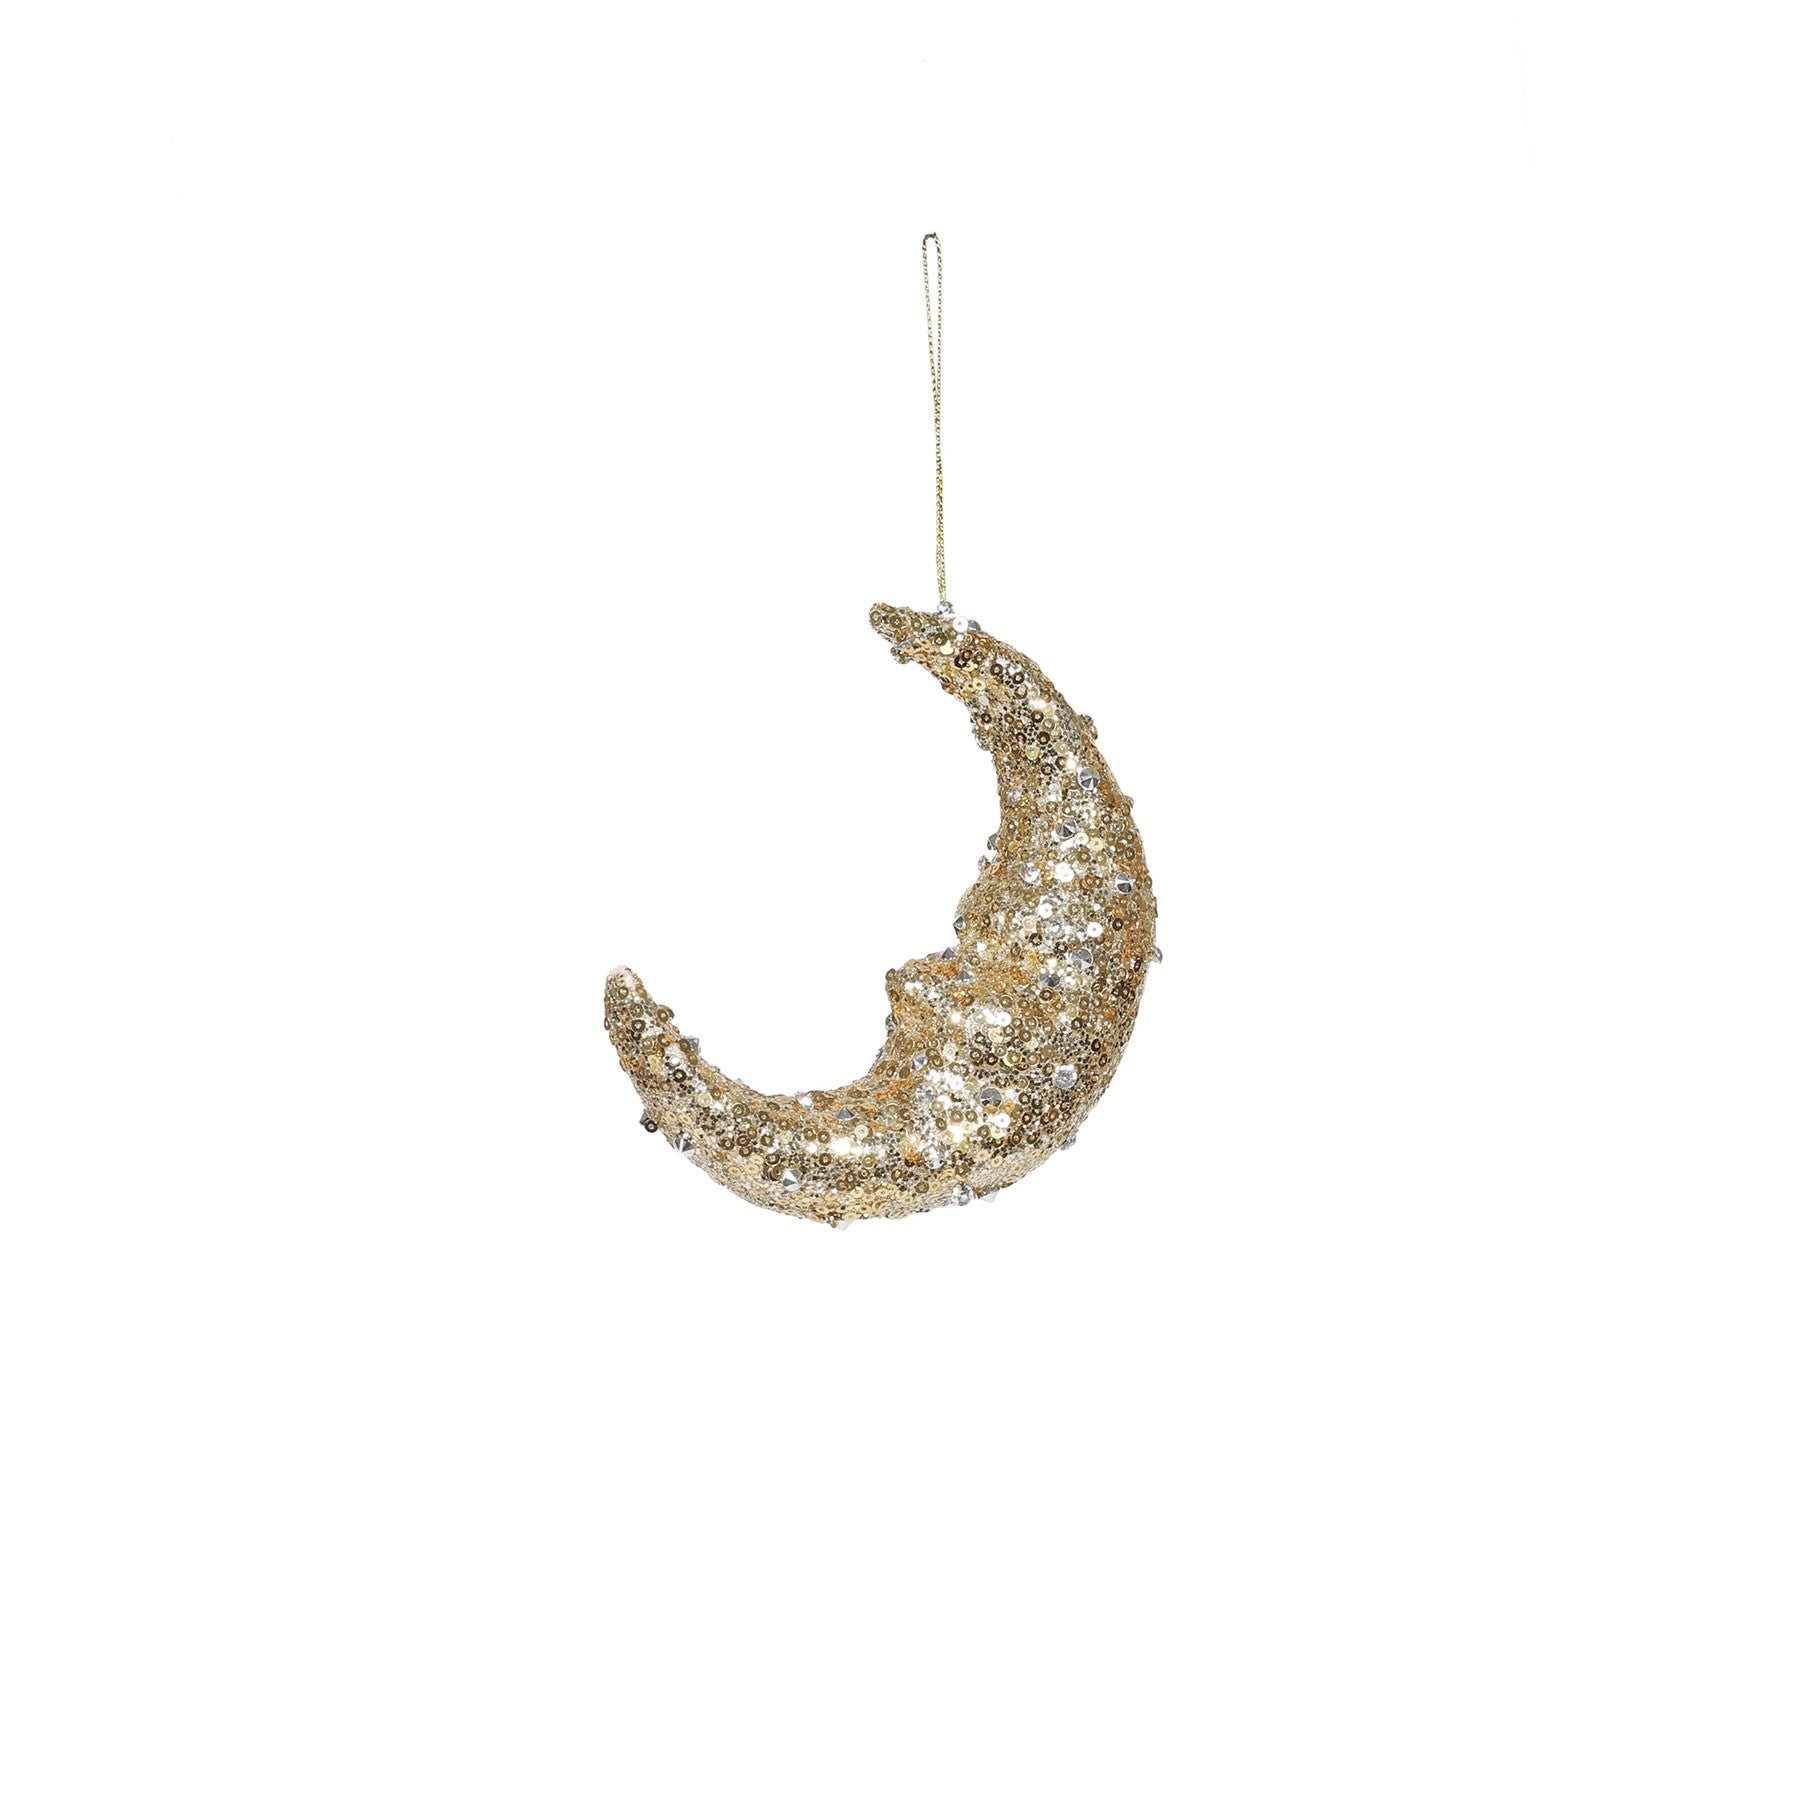 View Gold Moon Hanging Decoration 13cm information